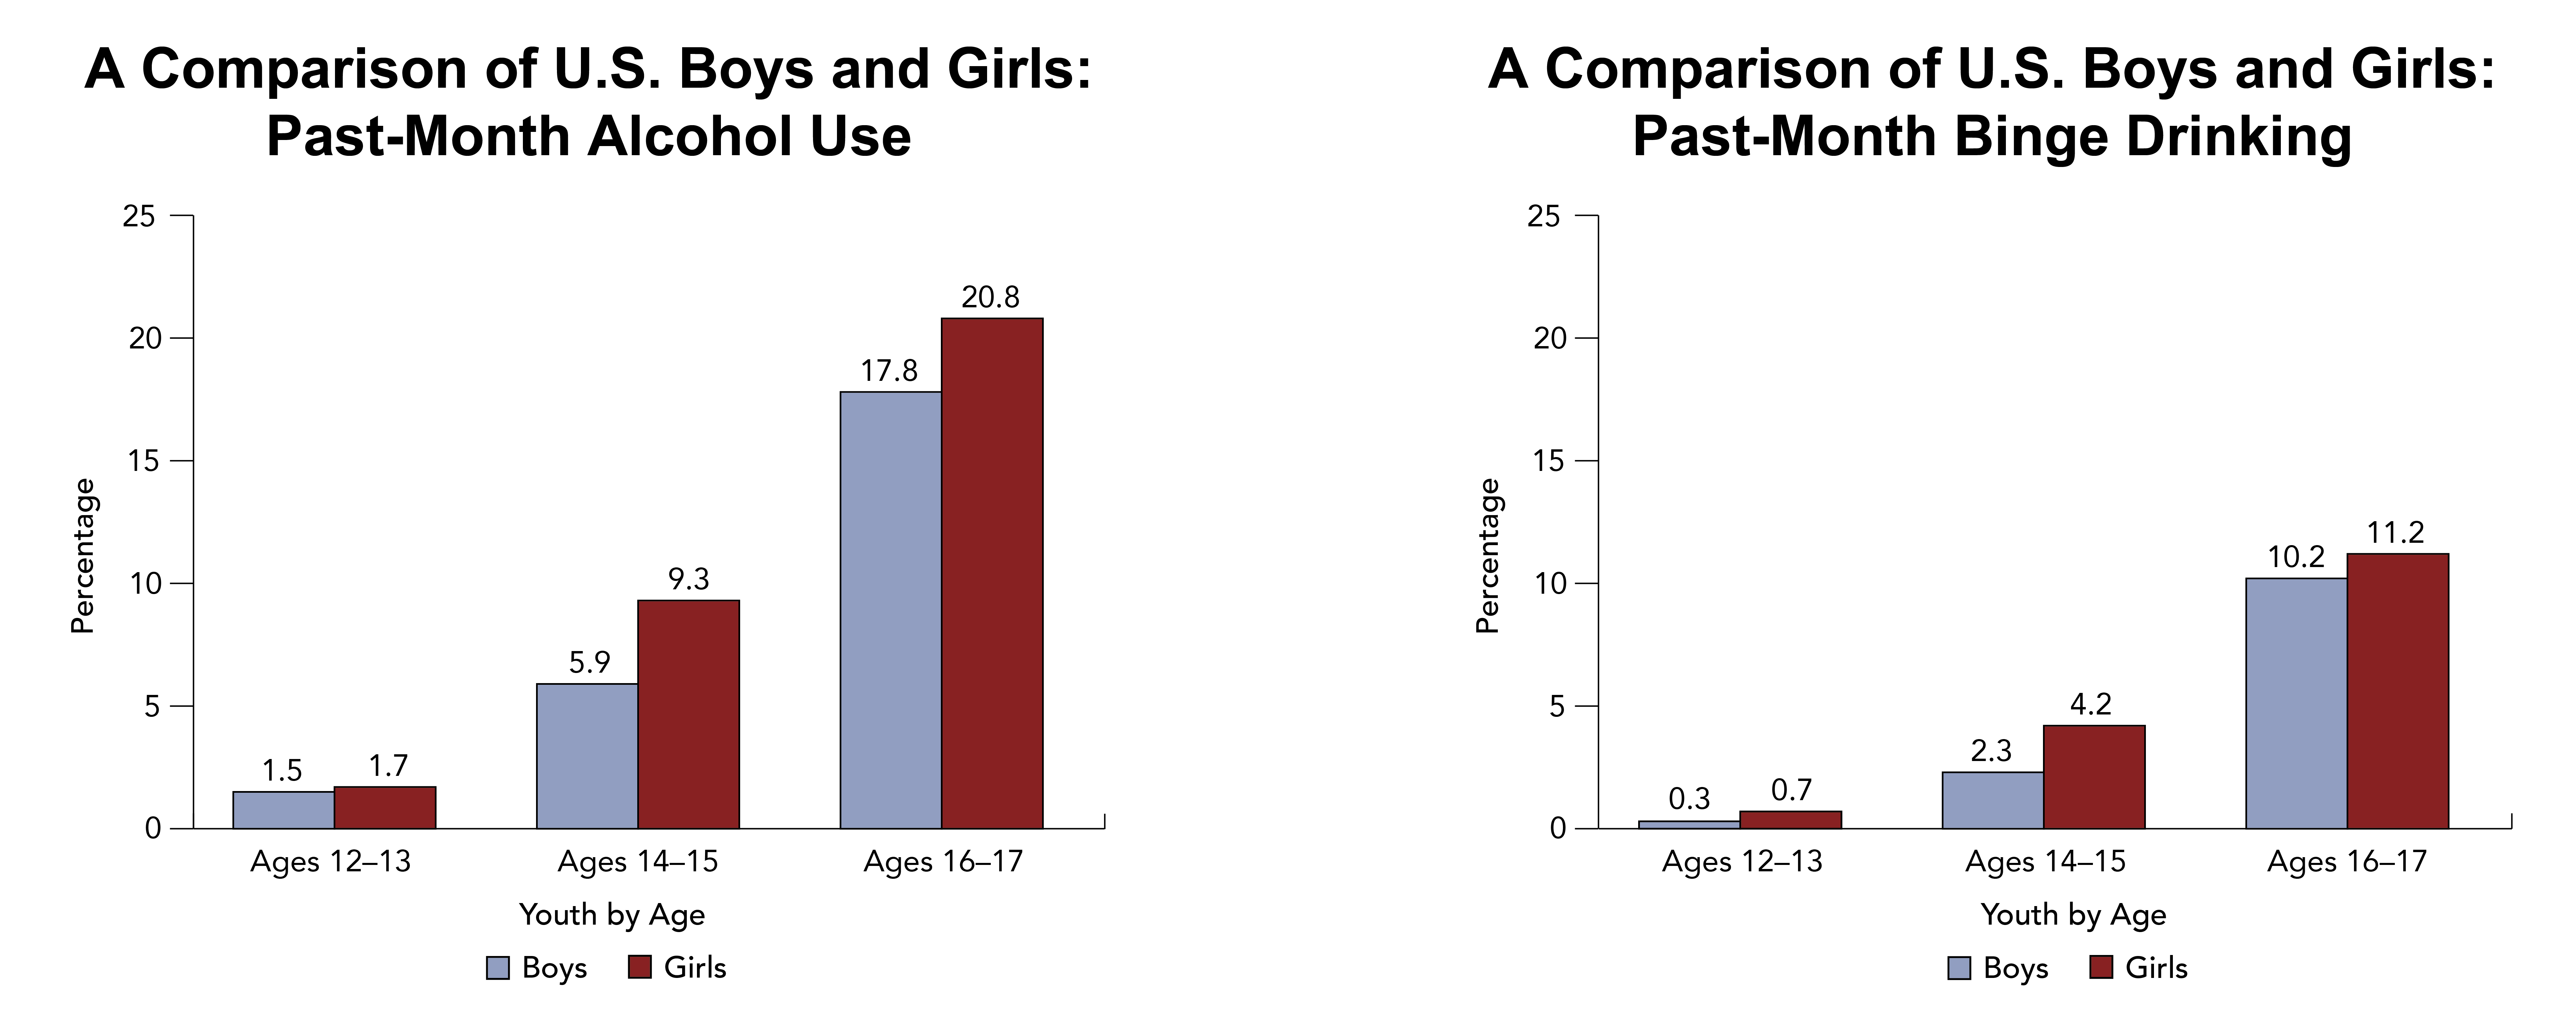 Side-by-side graphs showing past-month alcohol use and past-month binge drinking between U.S. boys and girls